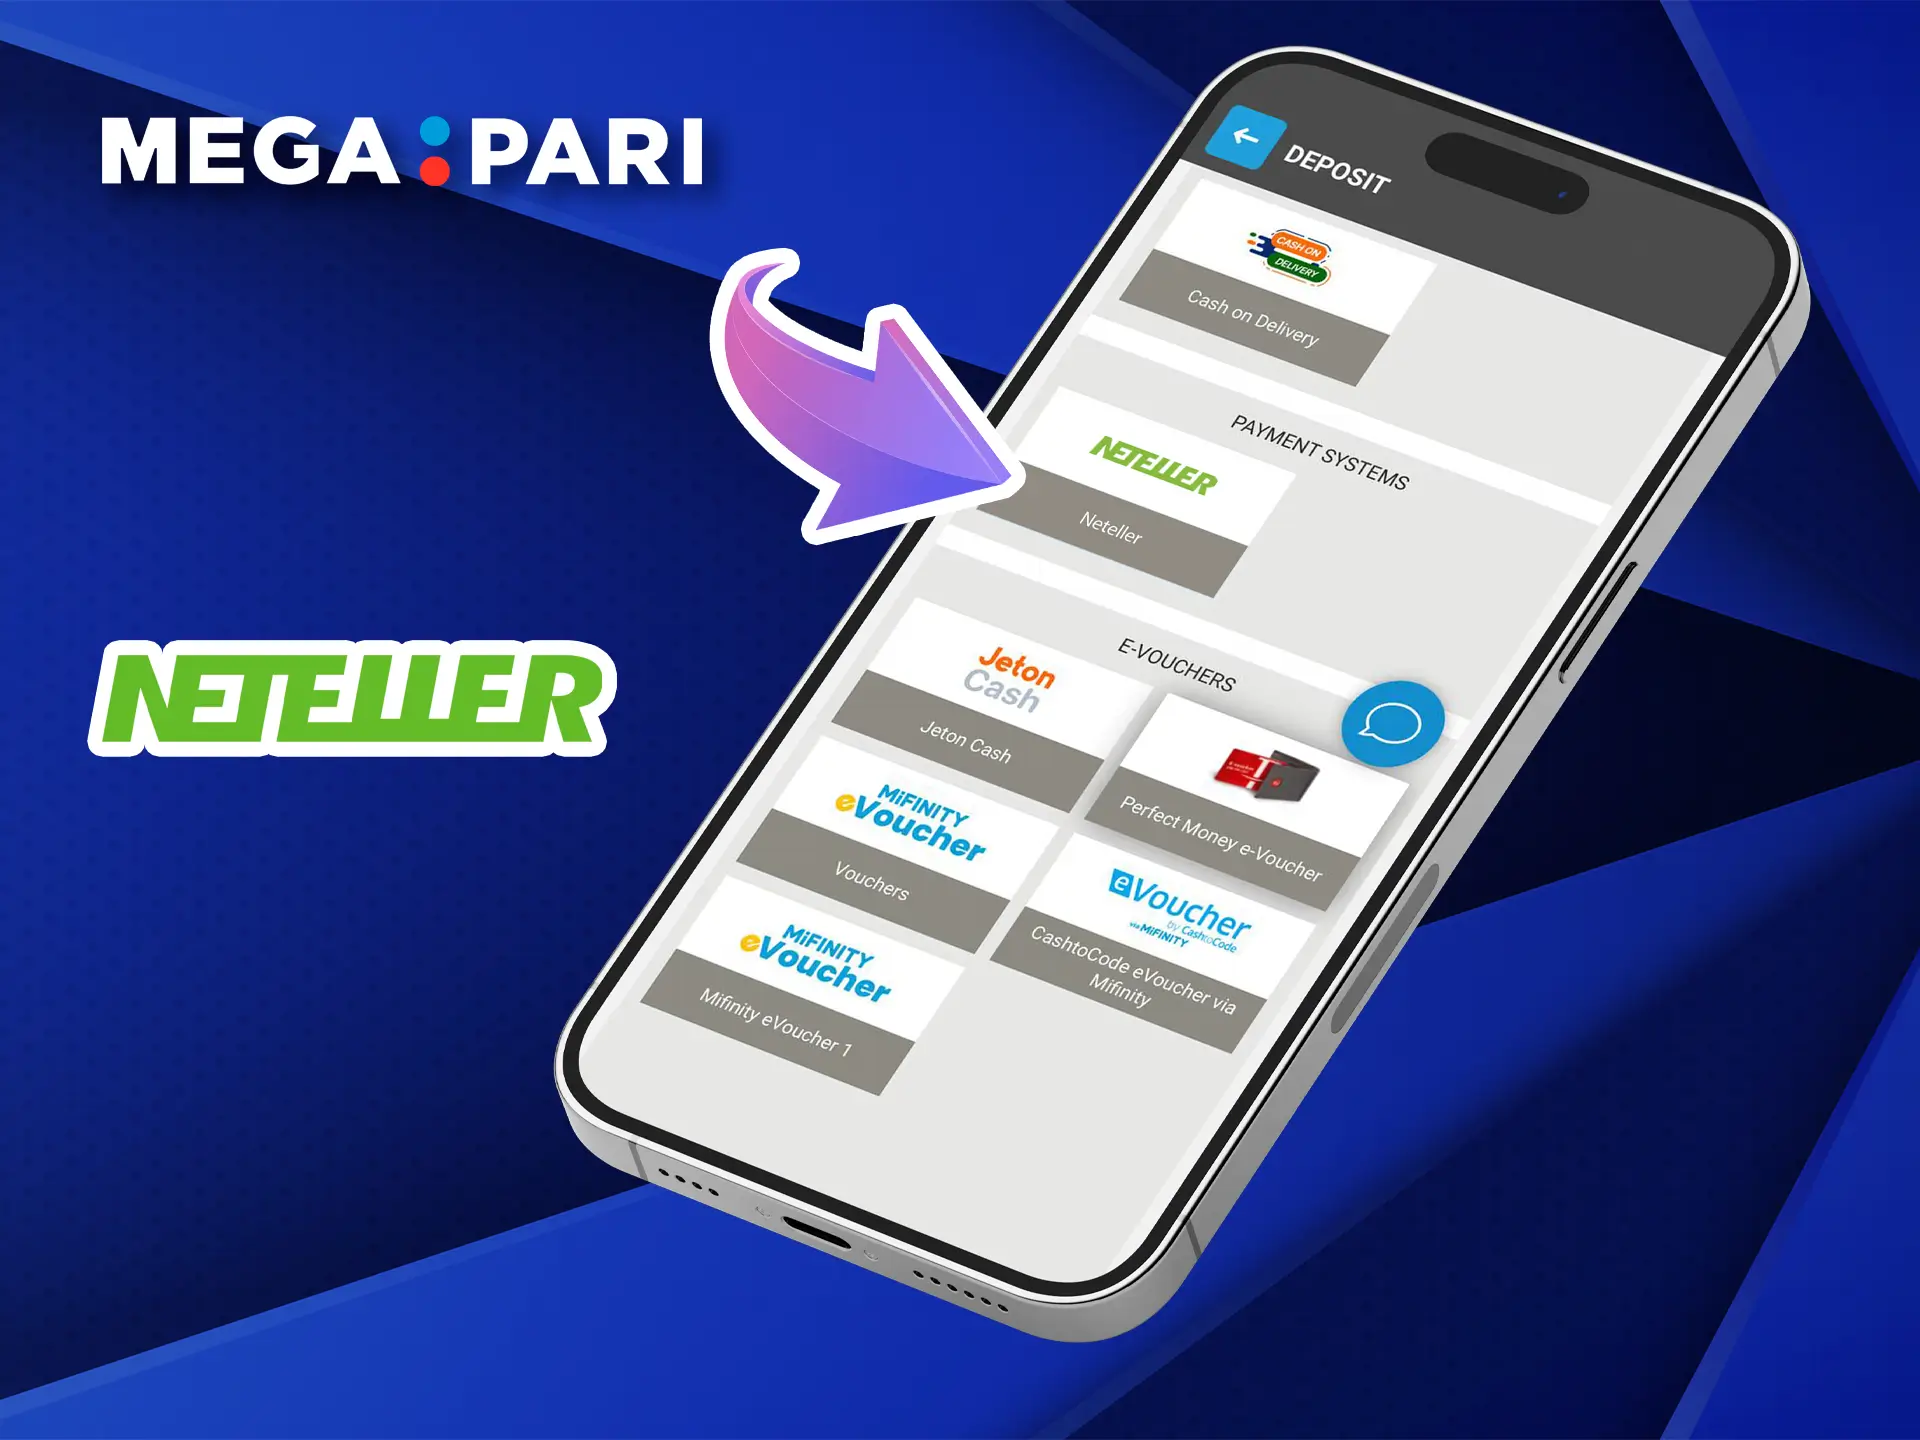 At Megapari, you have access to instant top-ups thanks to the Neteller payment system.